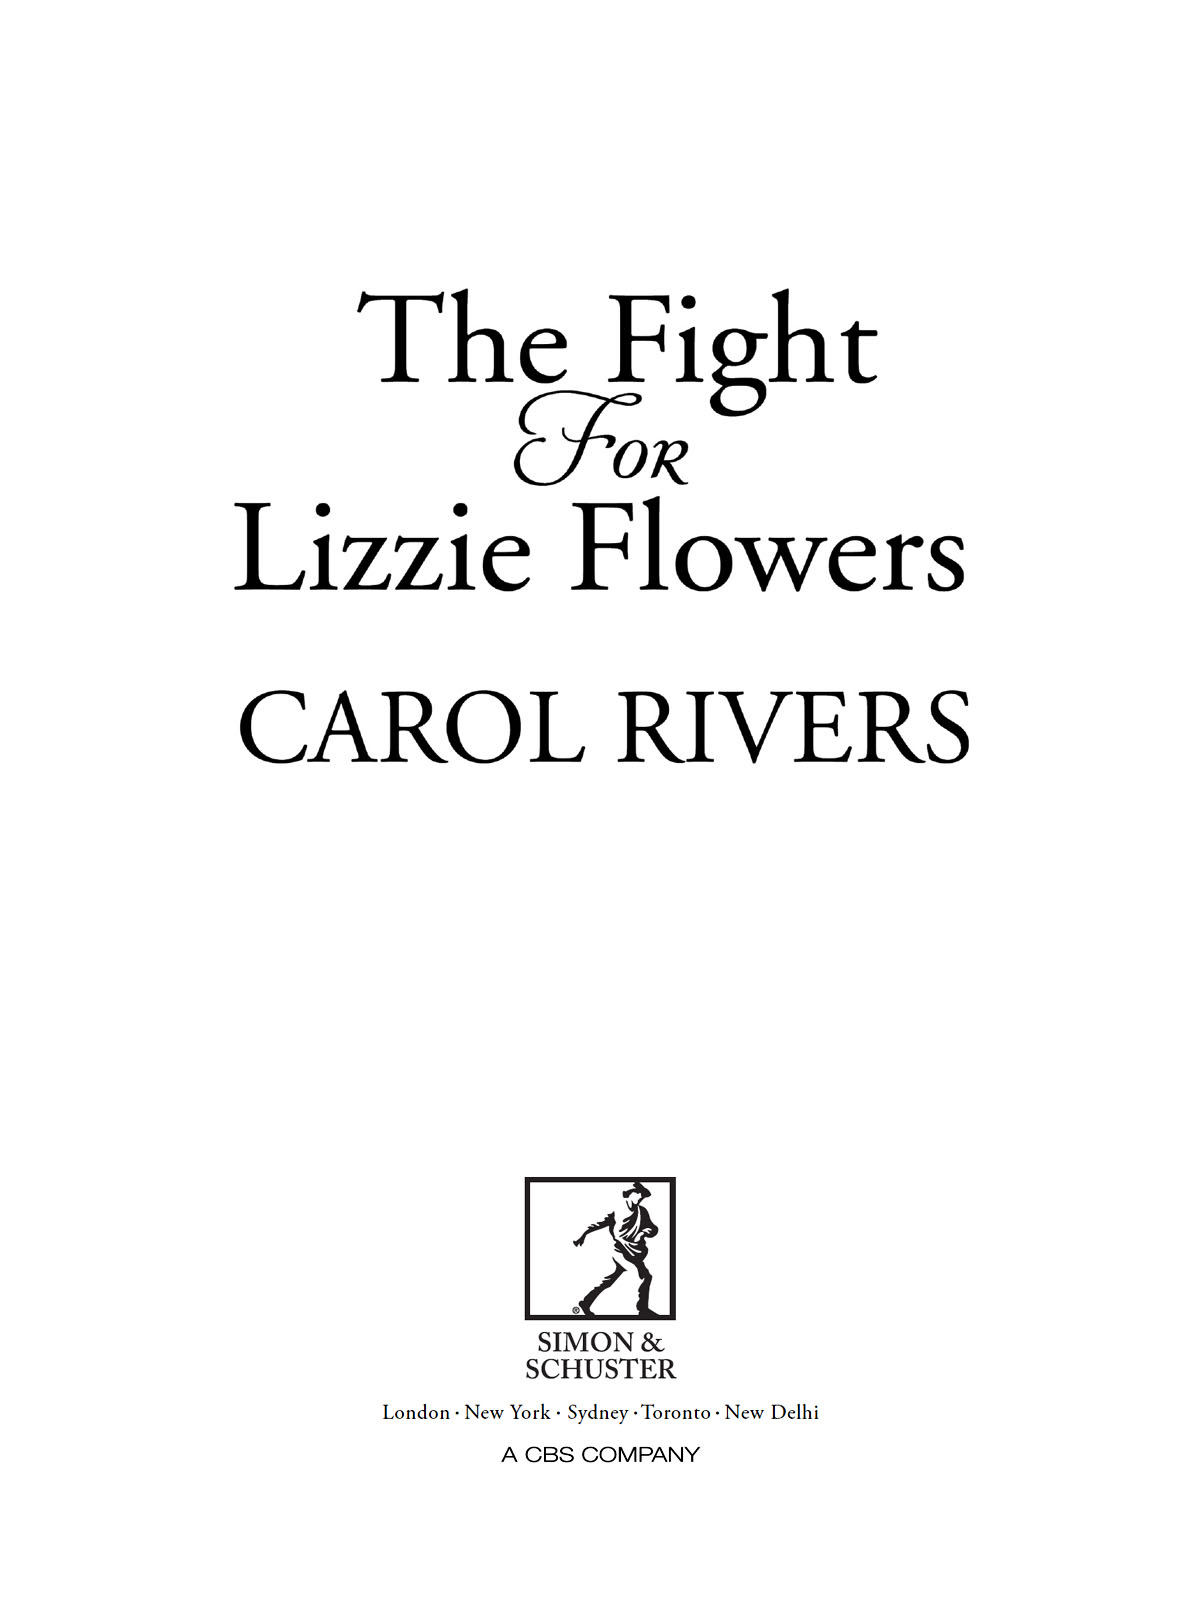 The Fight for Lizzie Flowers by Carol Rivers